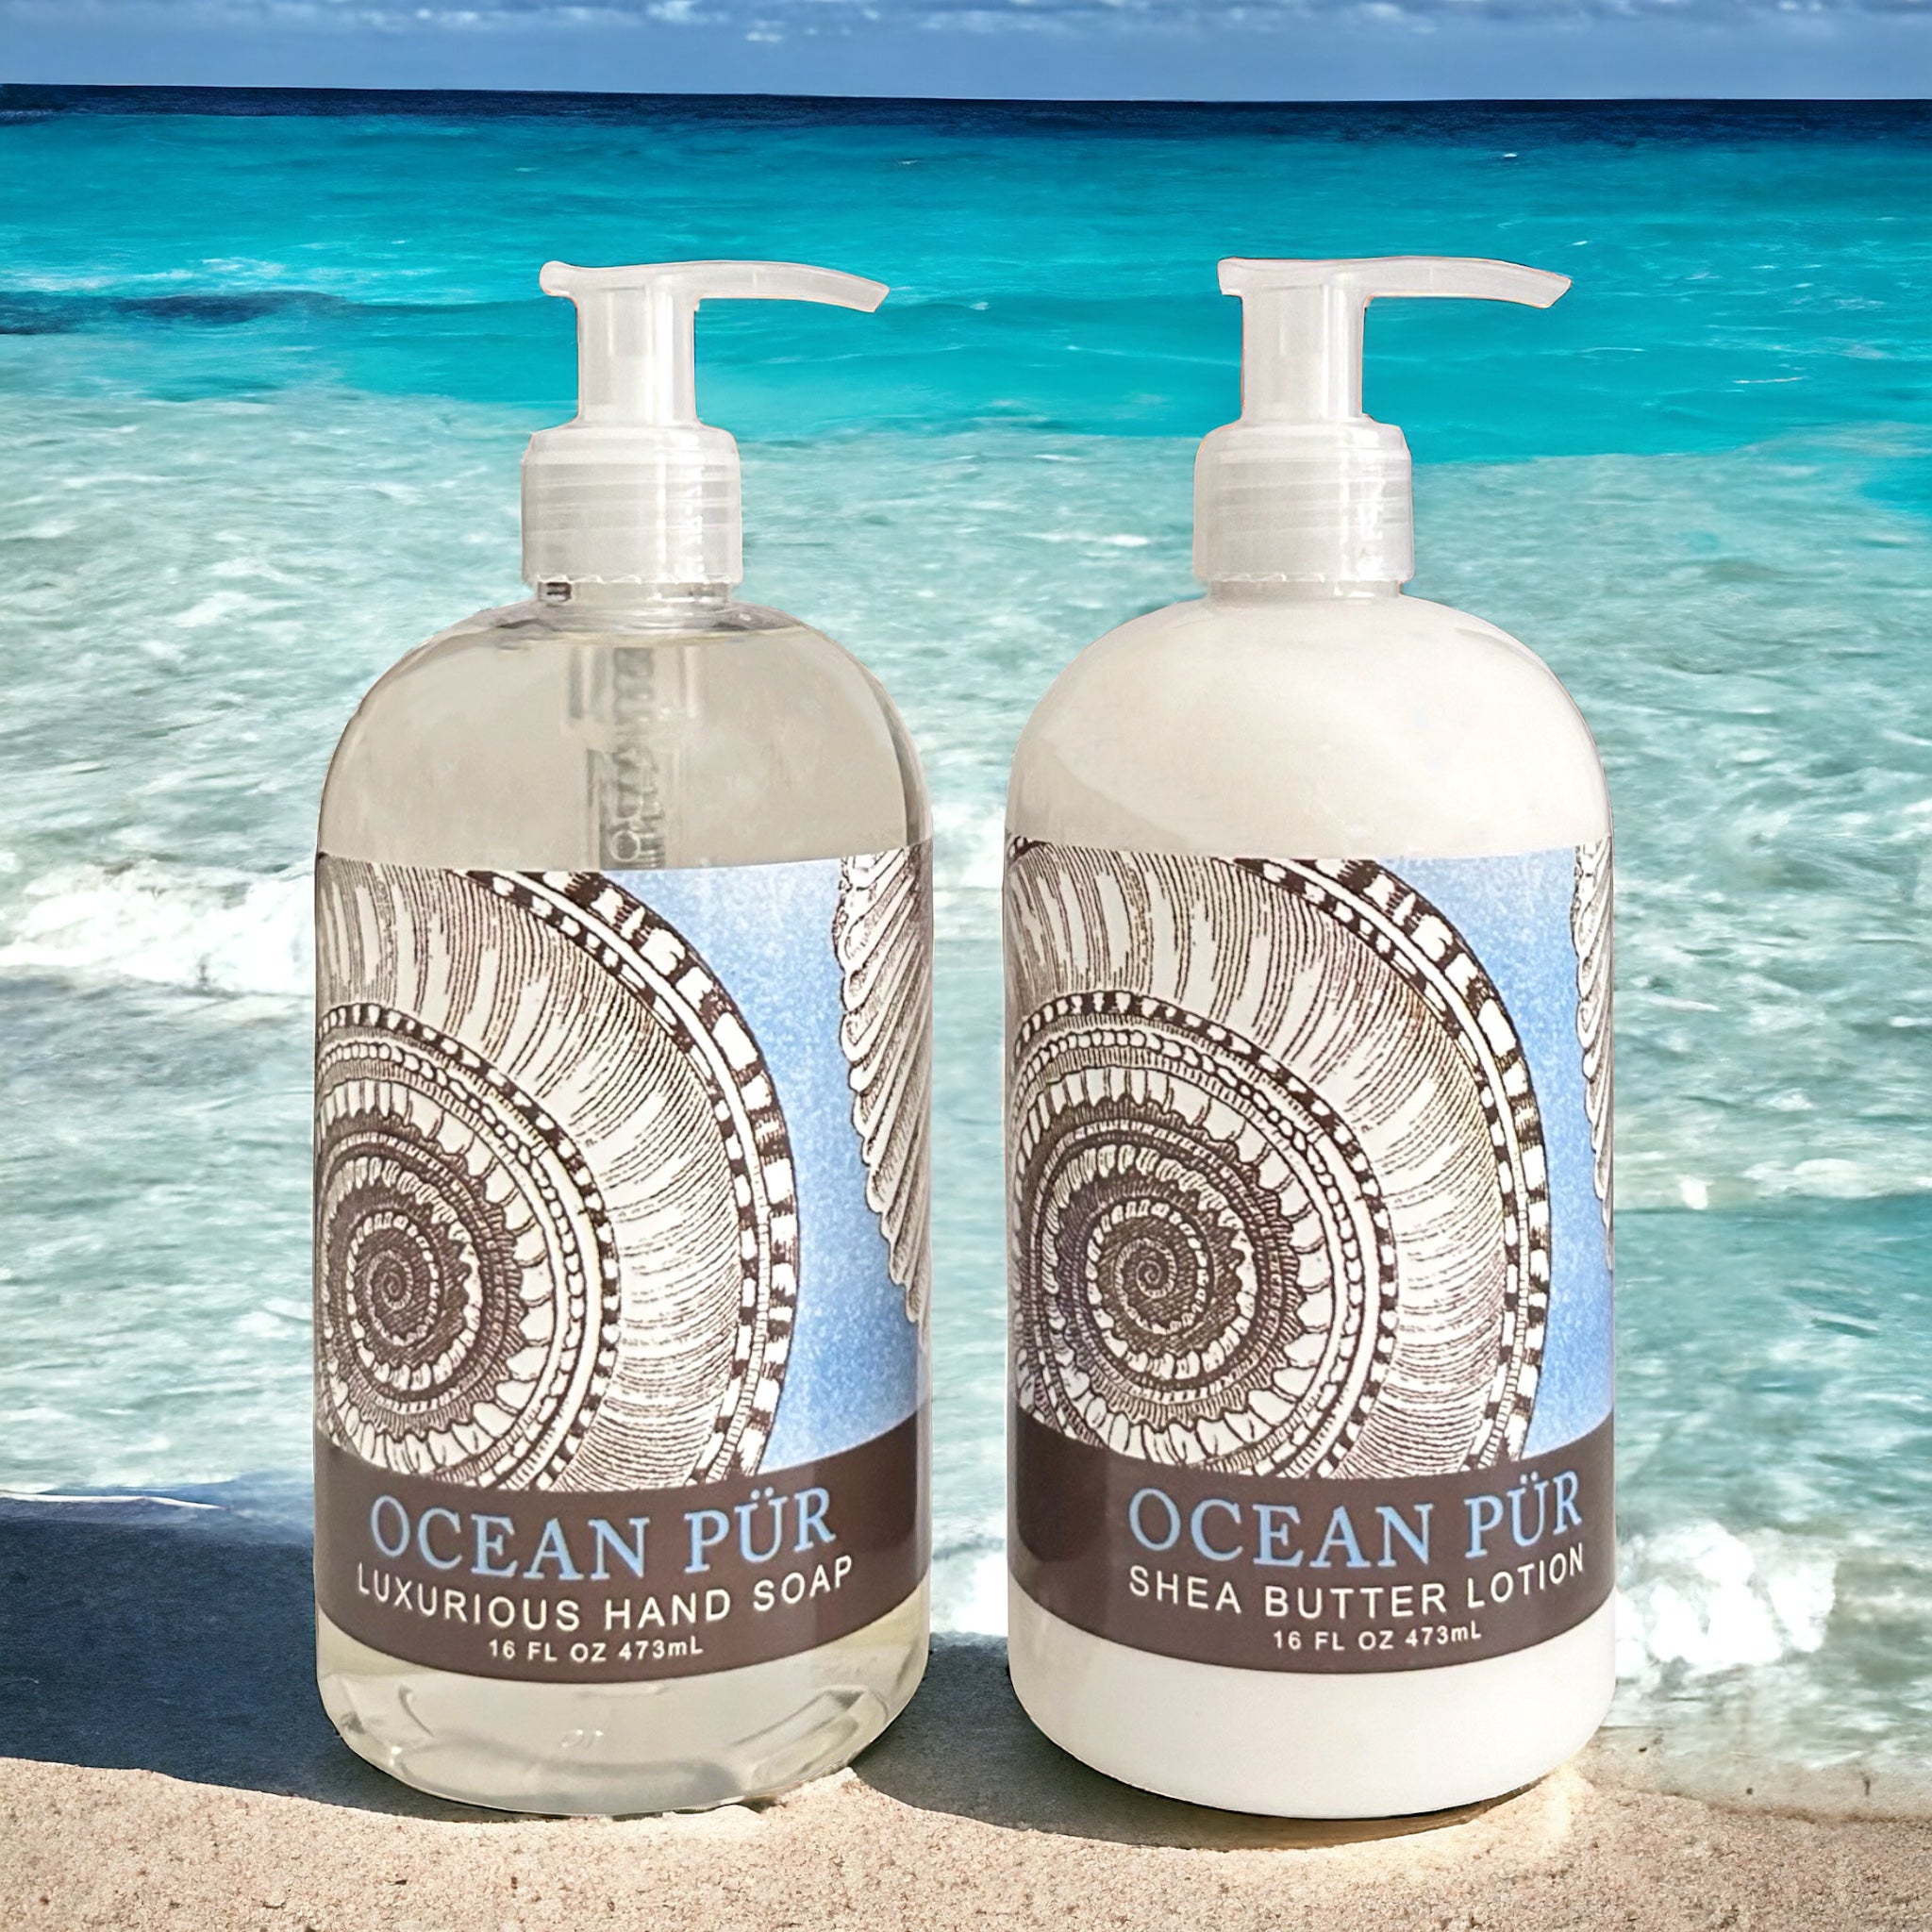 Greenwich Bay Trading Company Ocean PUR Shea Butter Lotion and Hand Soap